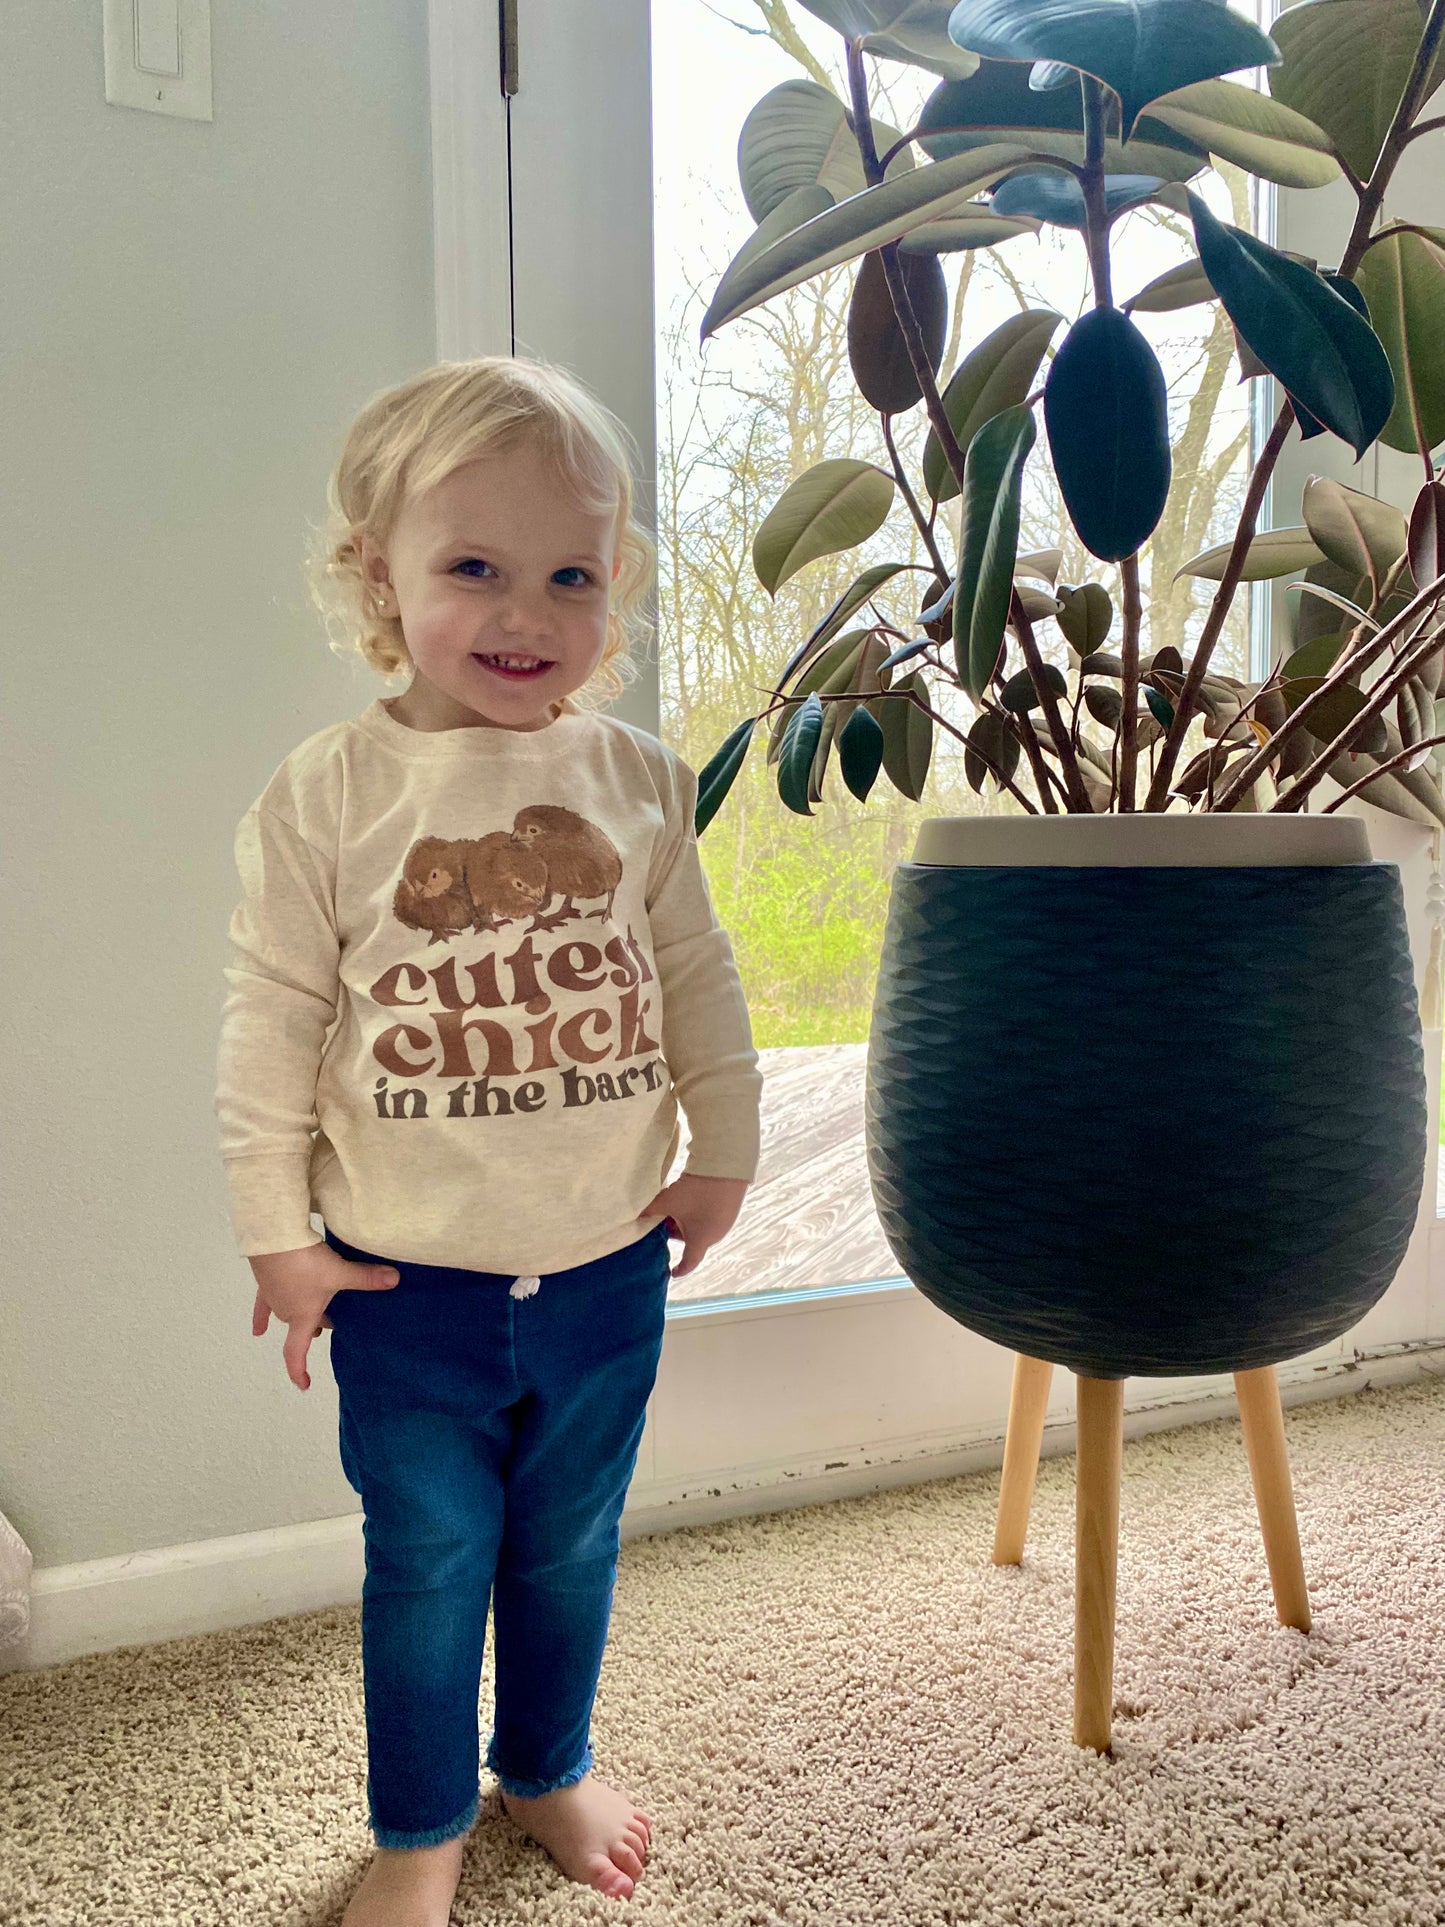 "Cutest Chick in the barn" Beige Long sleeve shirt